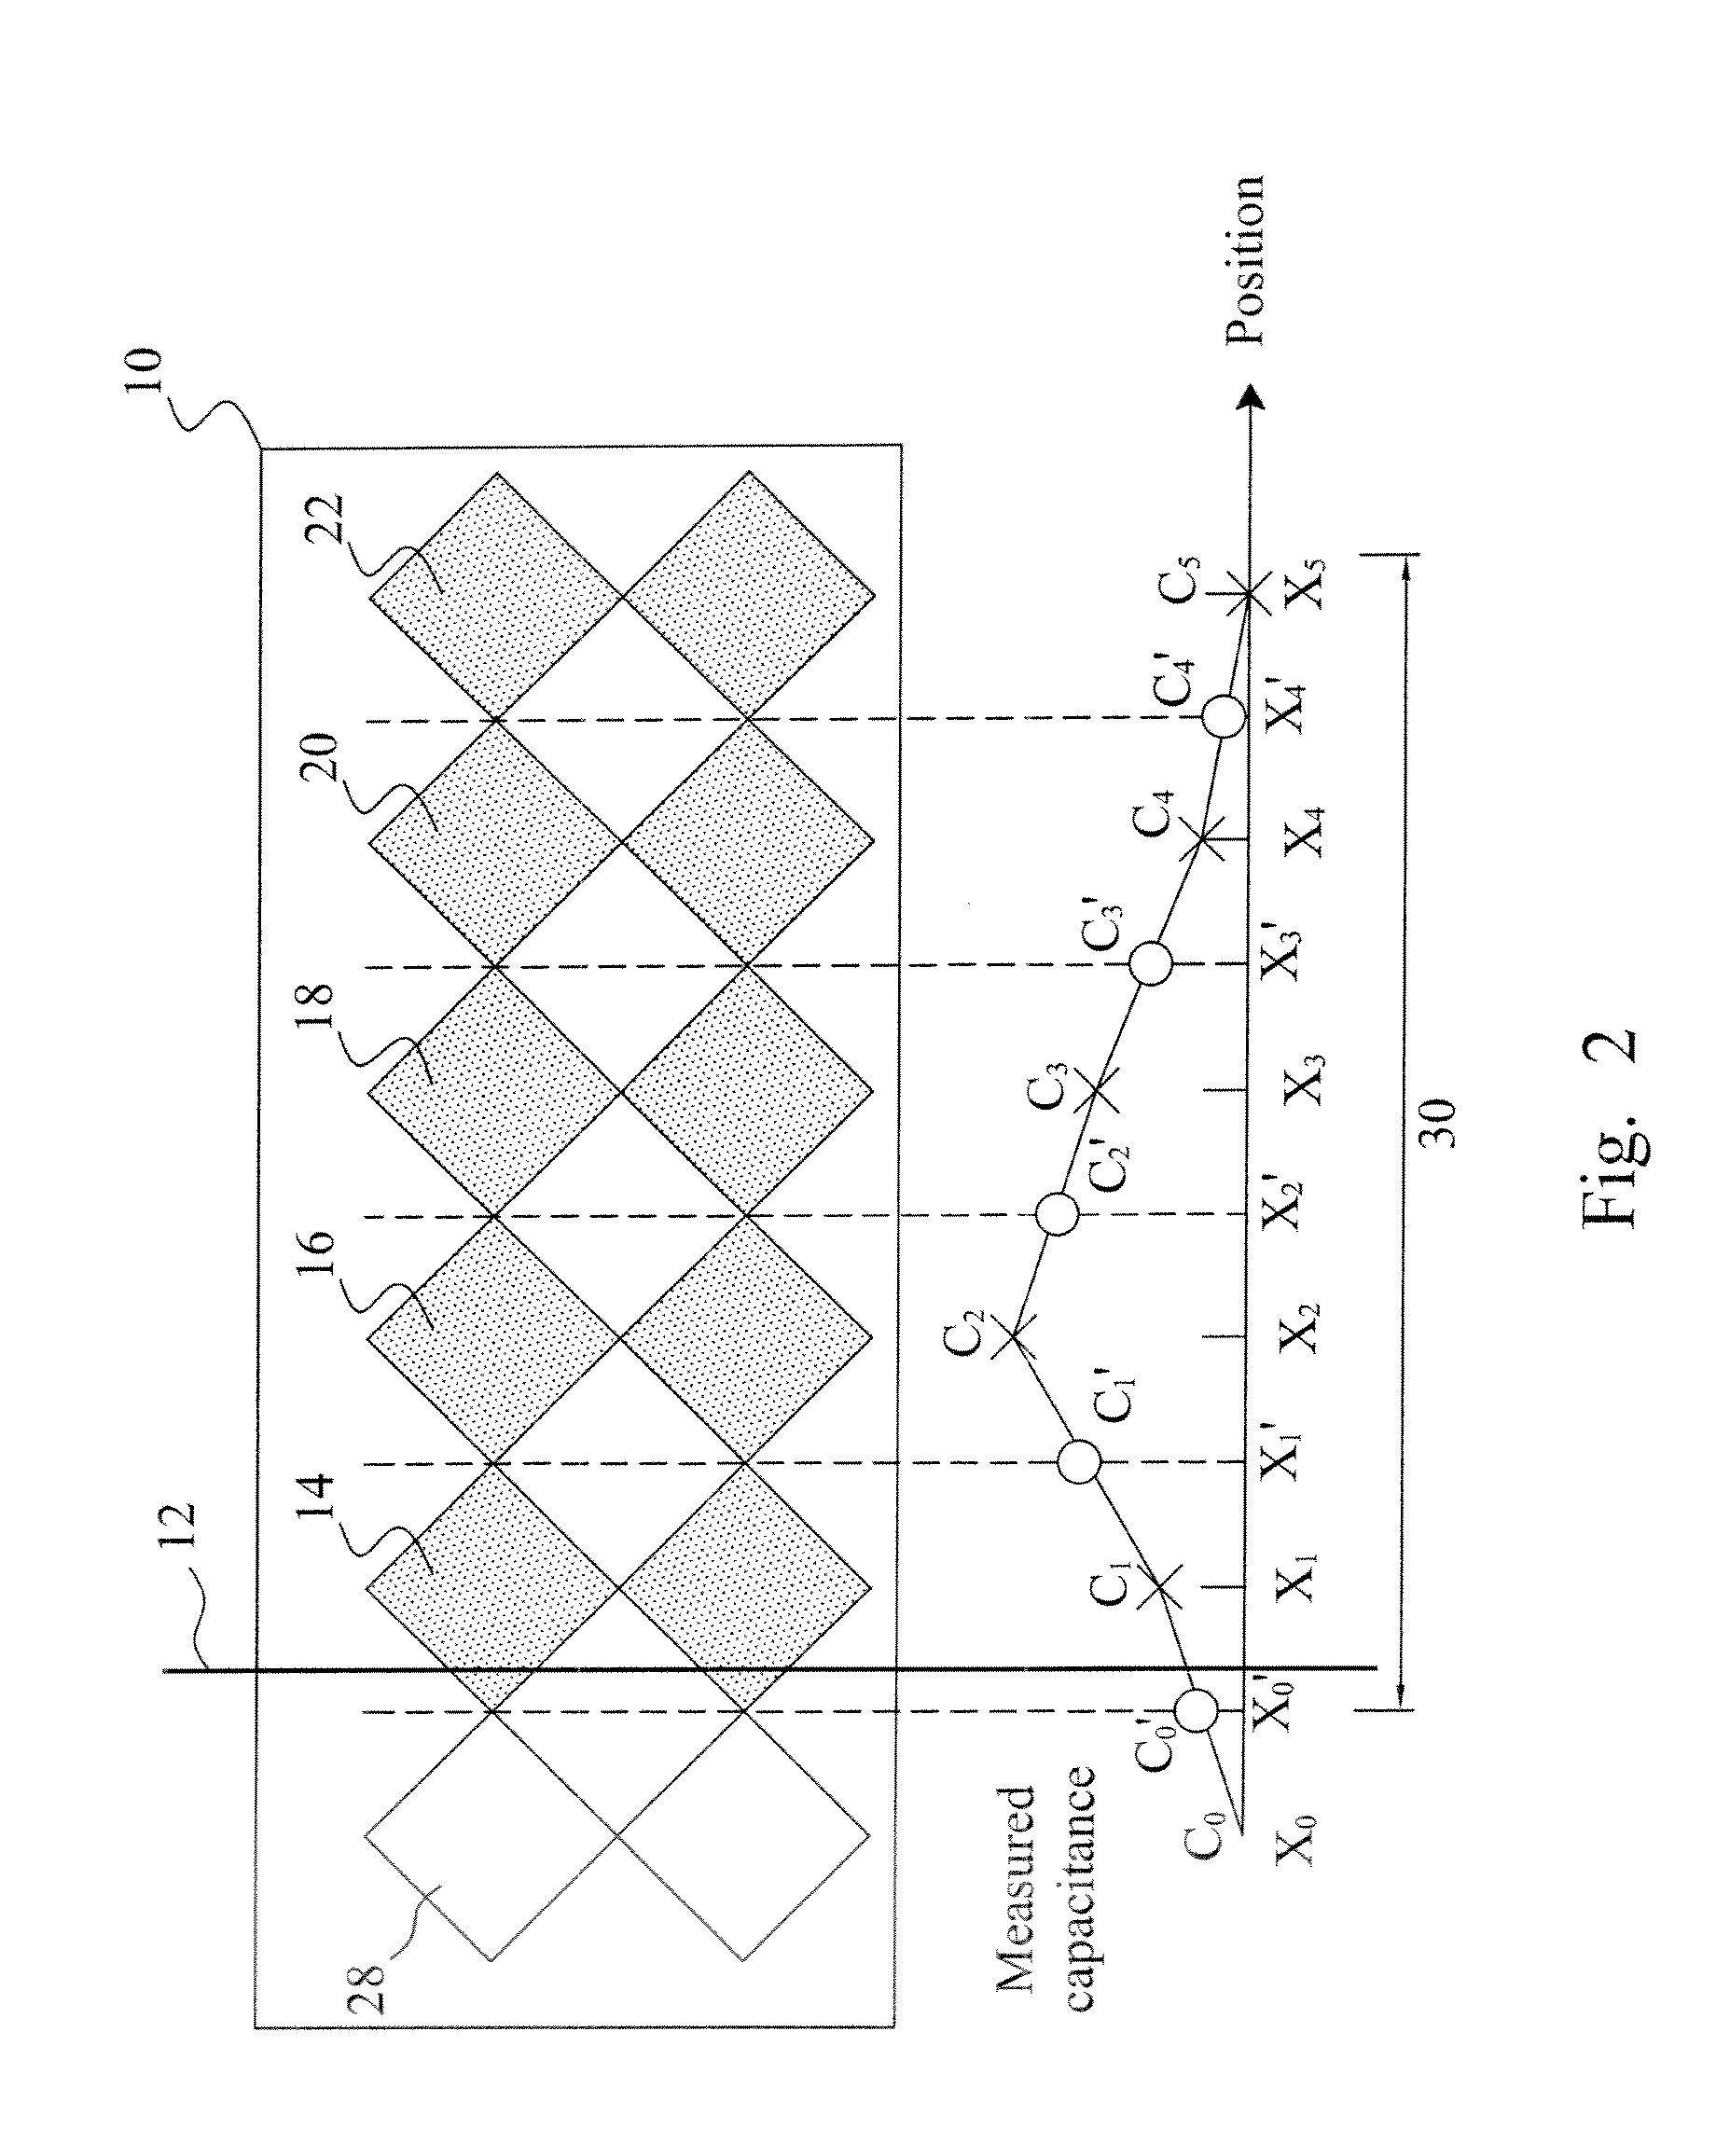 Boundary resolution improvement for a capacitive touch panel